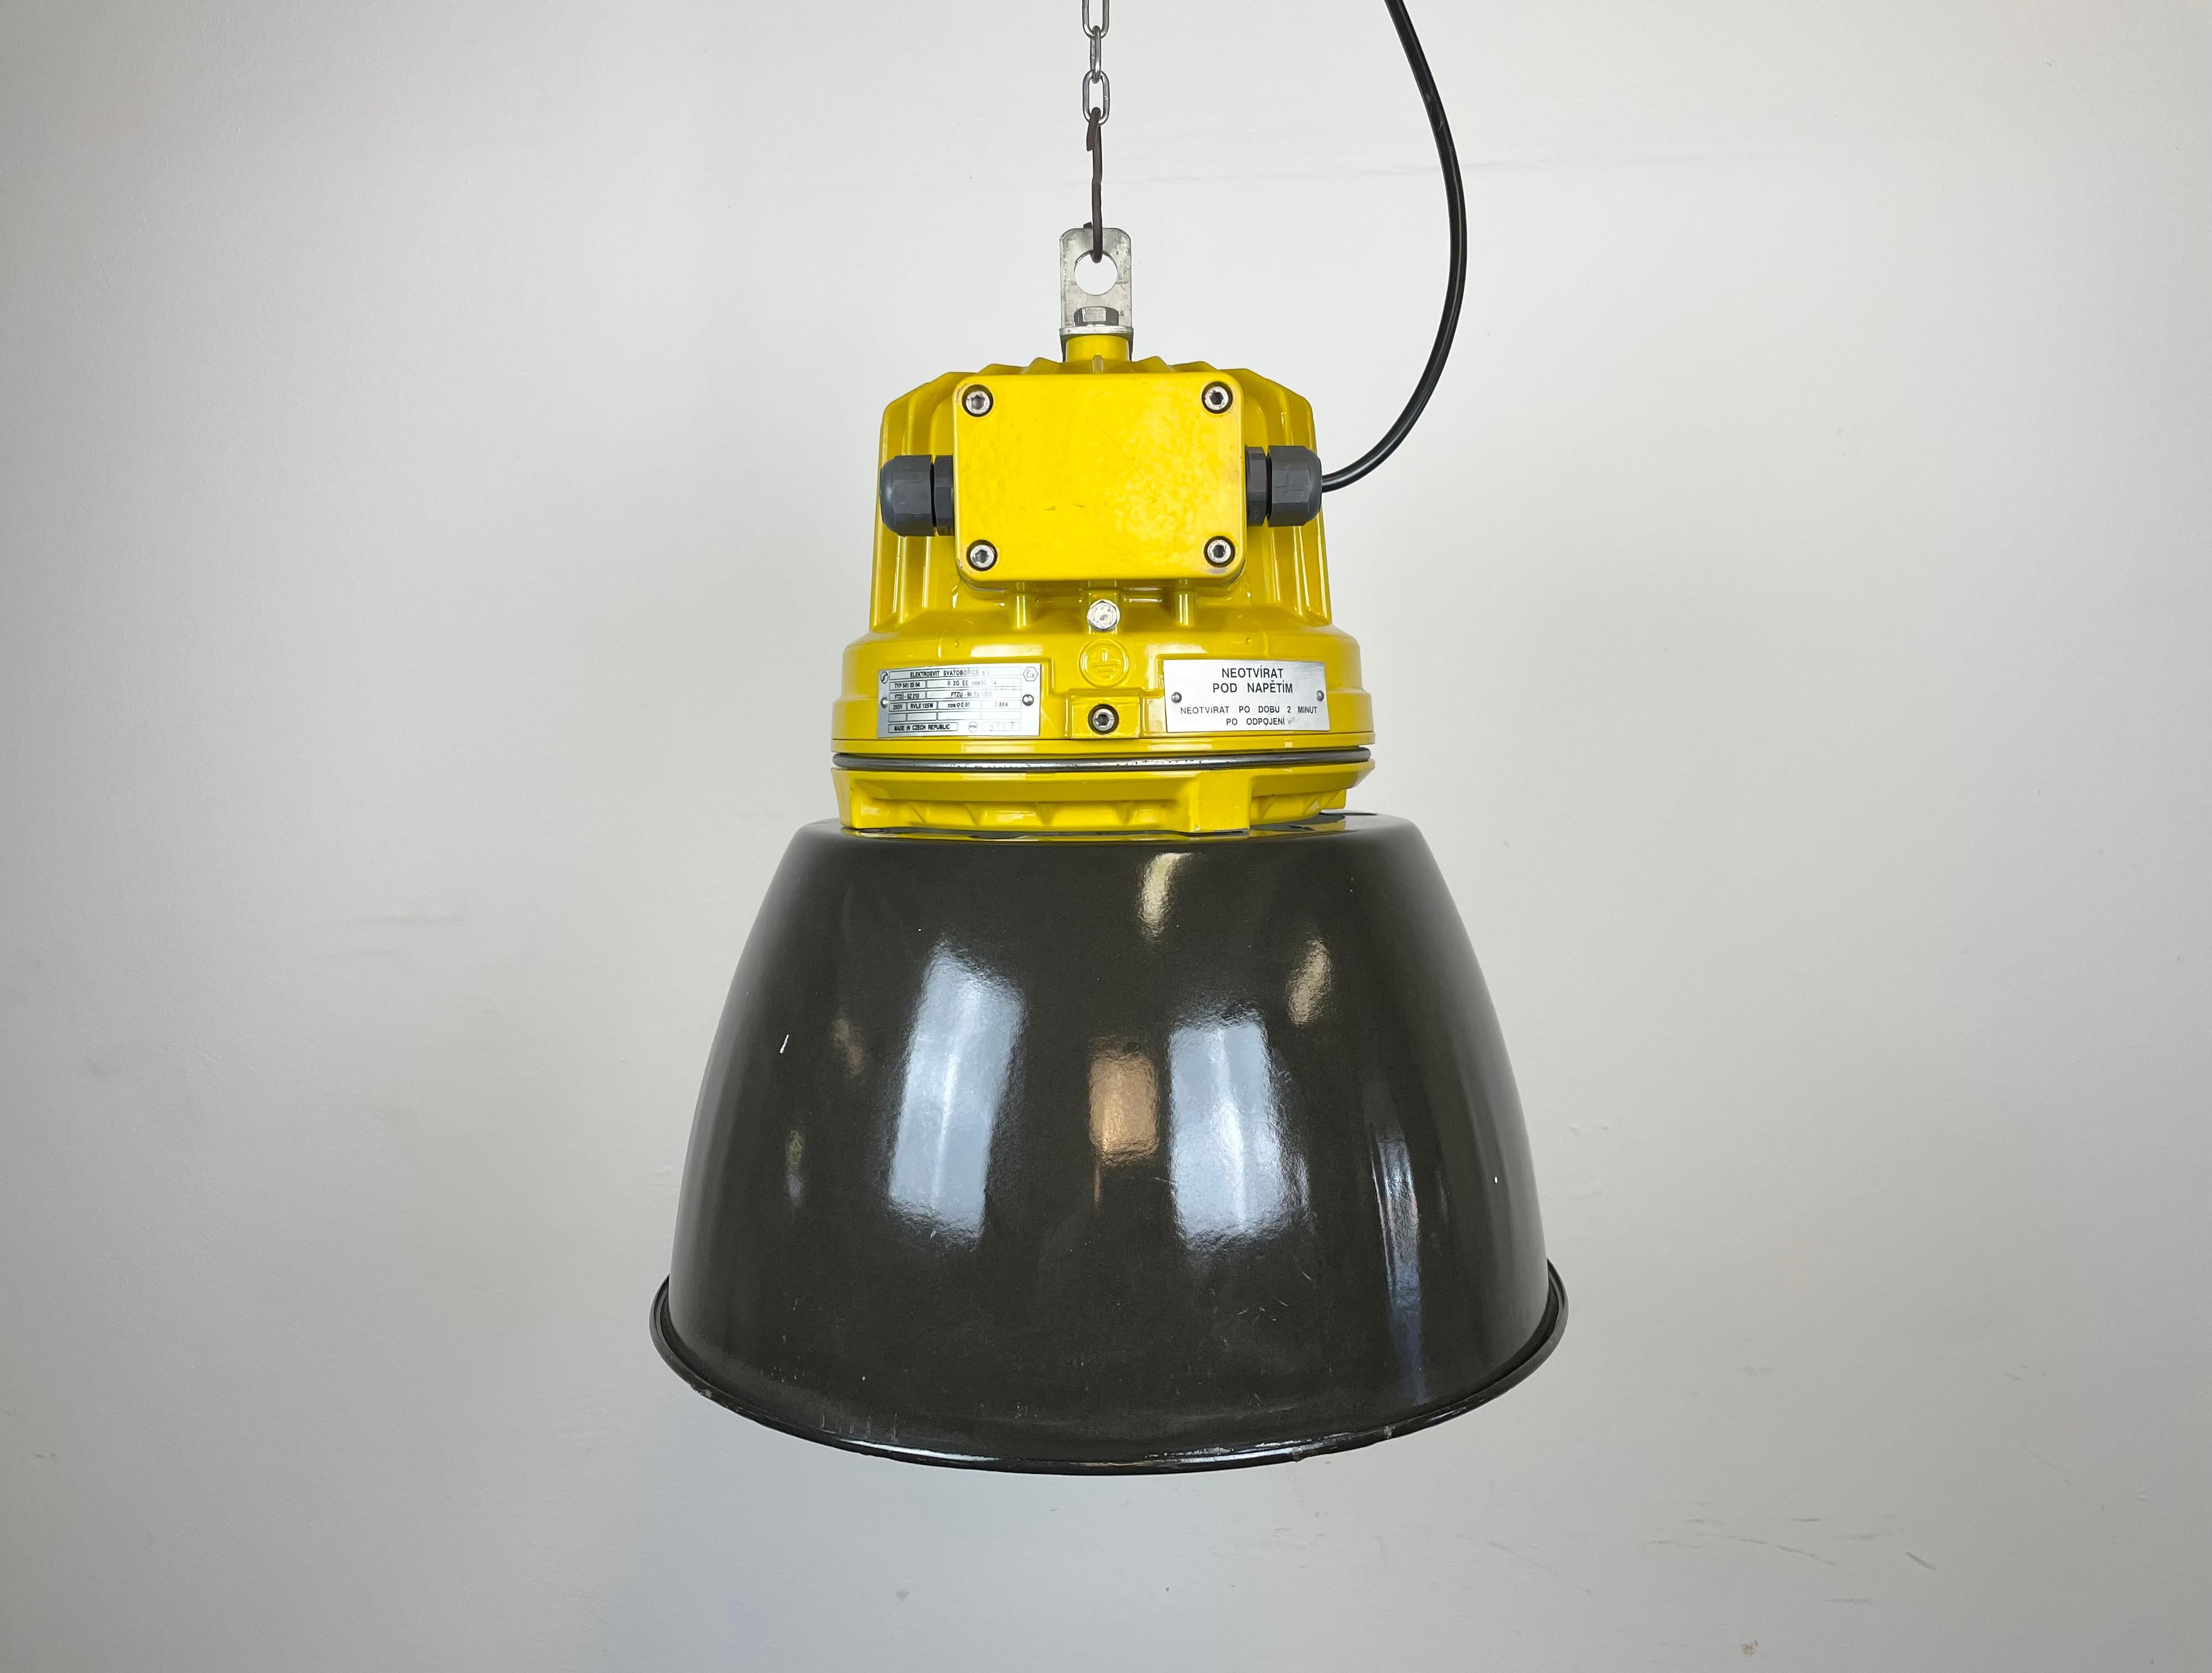 Industrial factory pendant light manufactured by Elektrosvit in Czech Republic during the 1990s. It features a cast aluminium body, an explosion-proof glass and black enameled shade with white enameled interior.
The socket requires E27 lightbulbs.